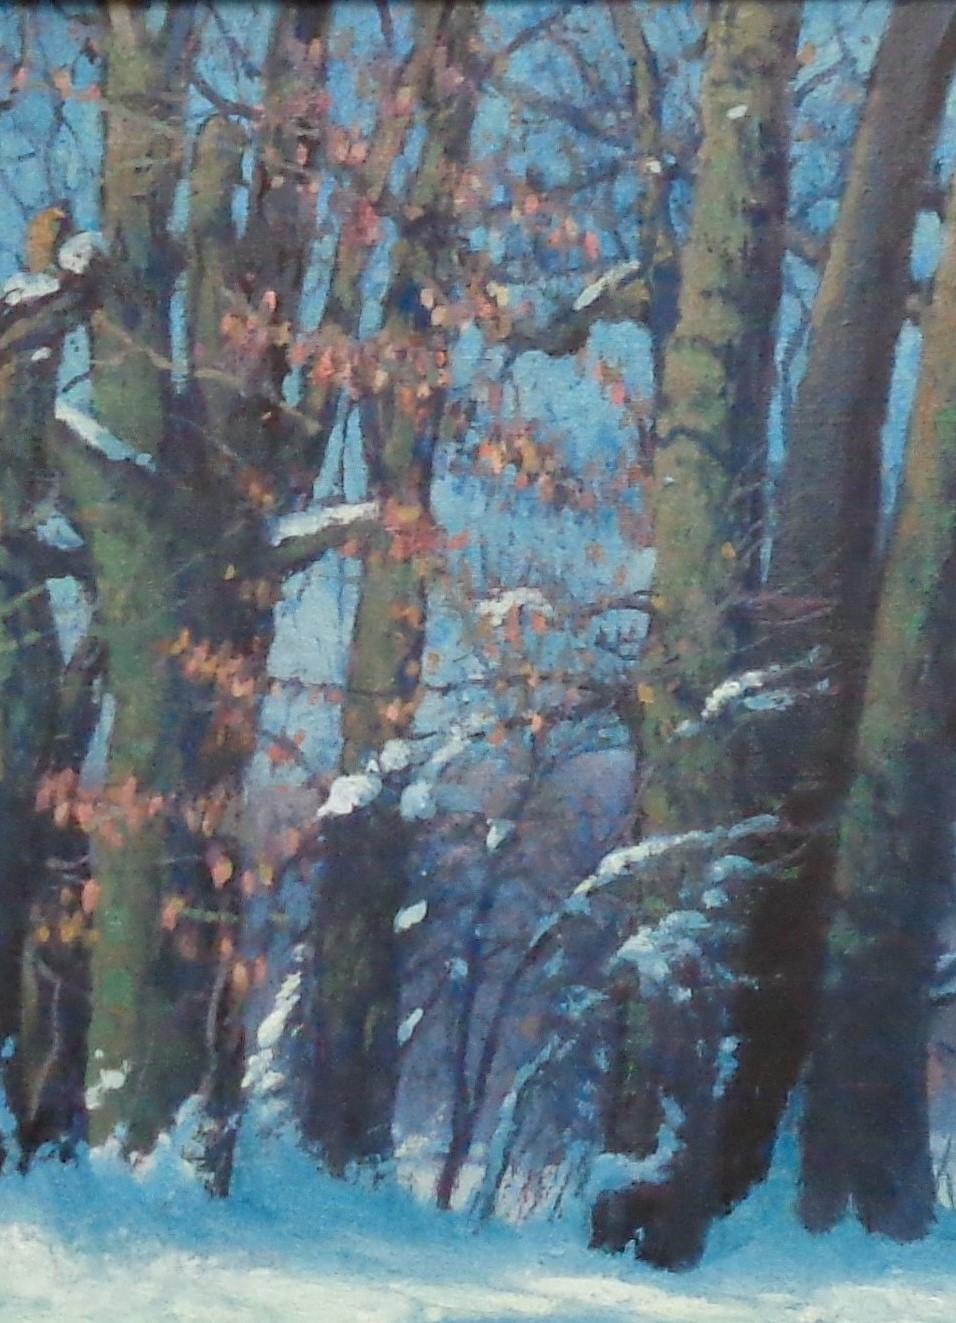  Winter Snow Scene Contemporary Landscape Oil Painting by Michael Budden For Sale 5